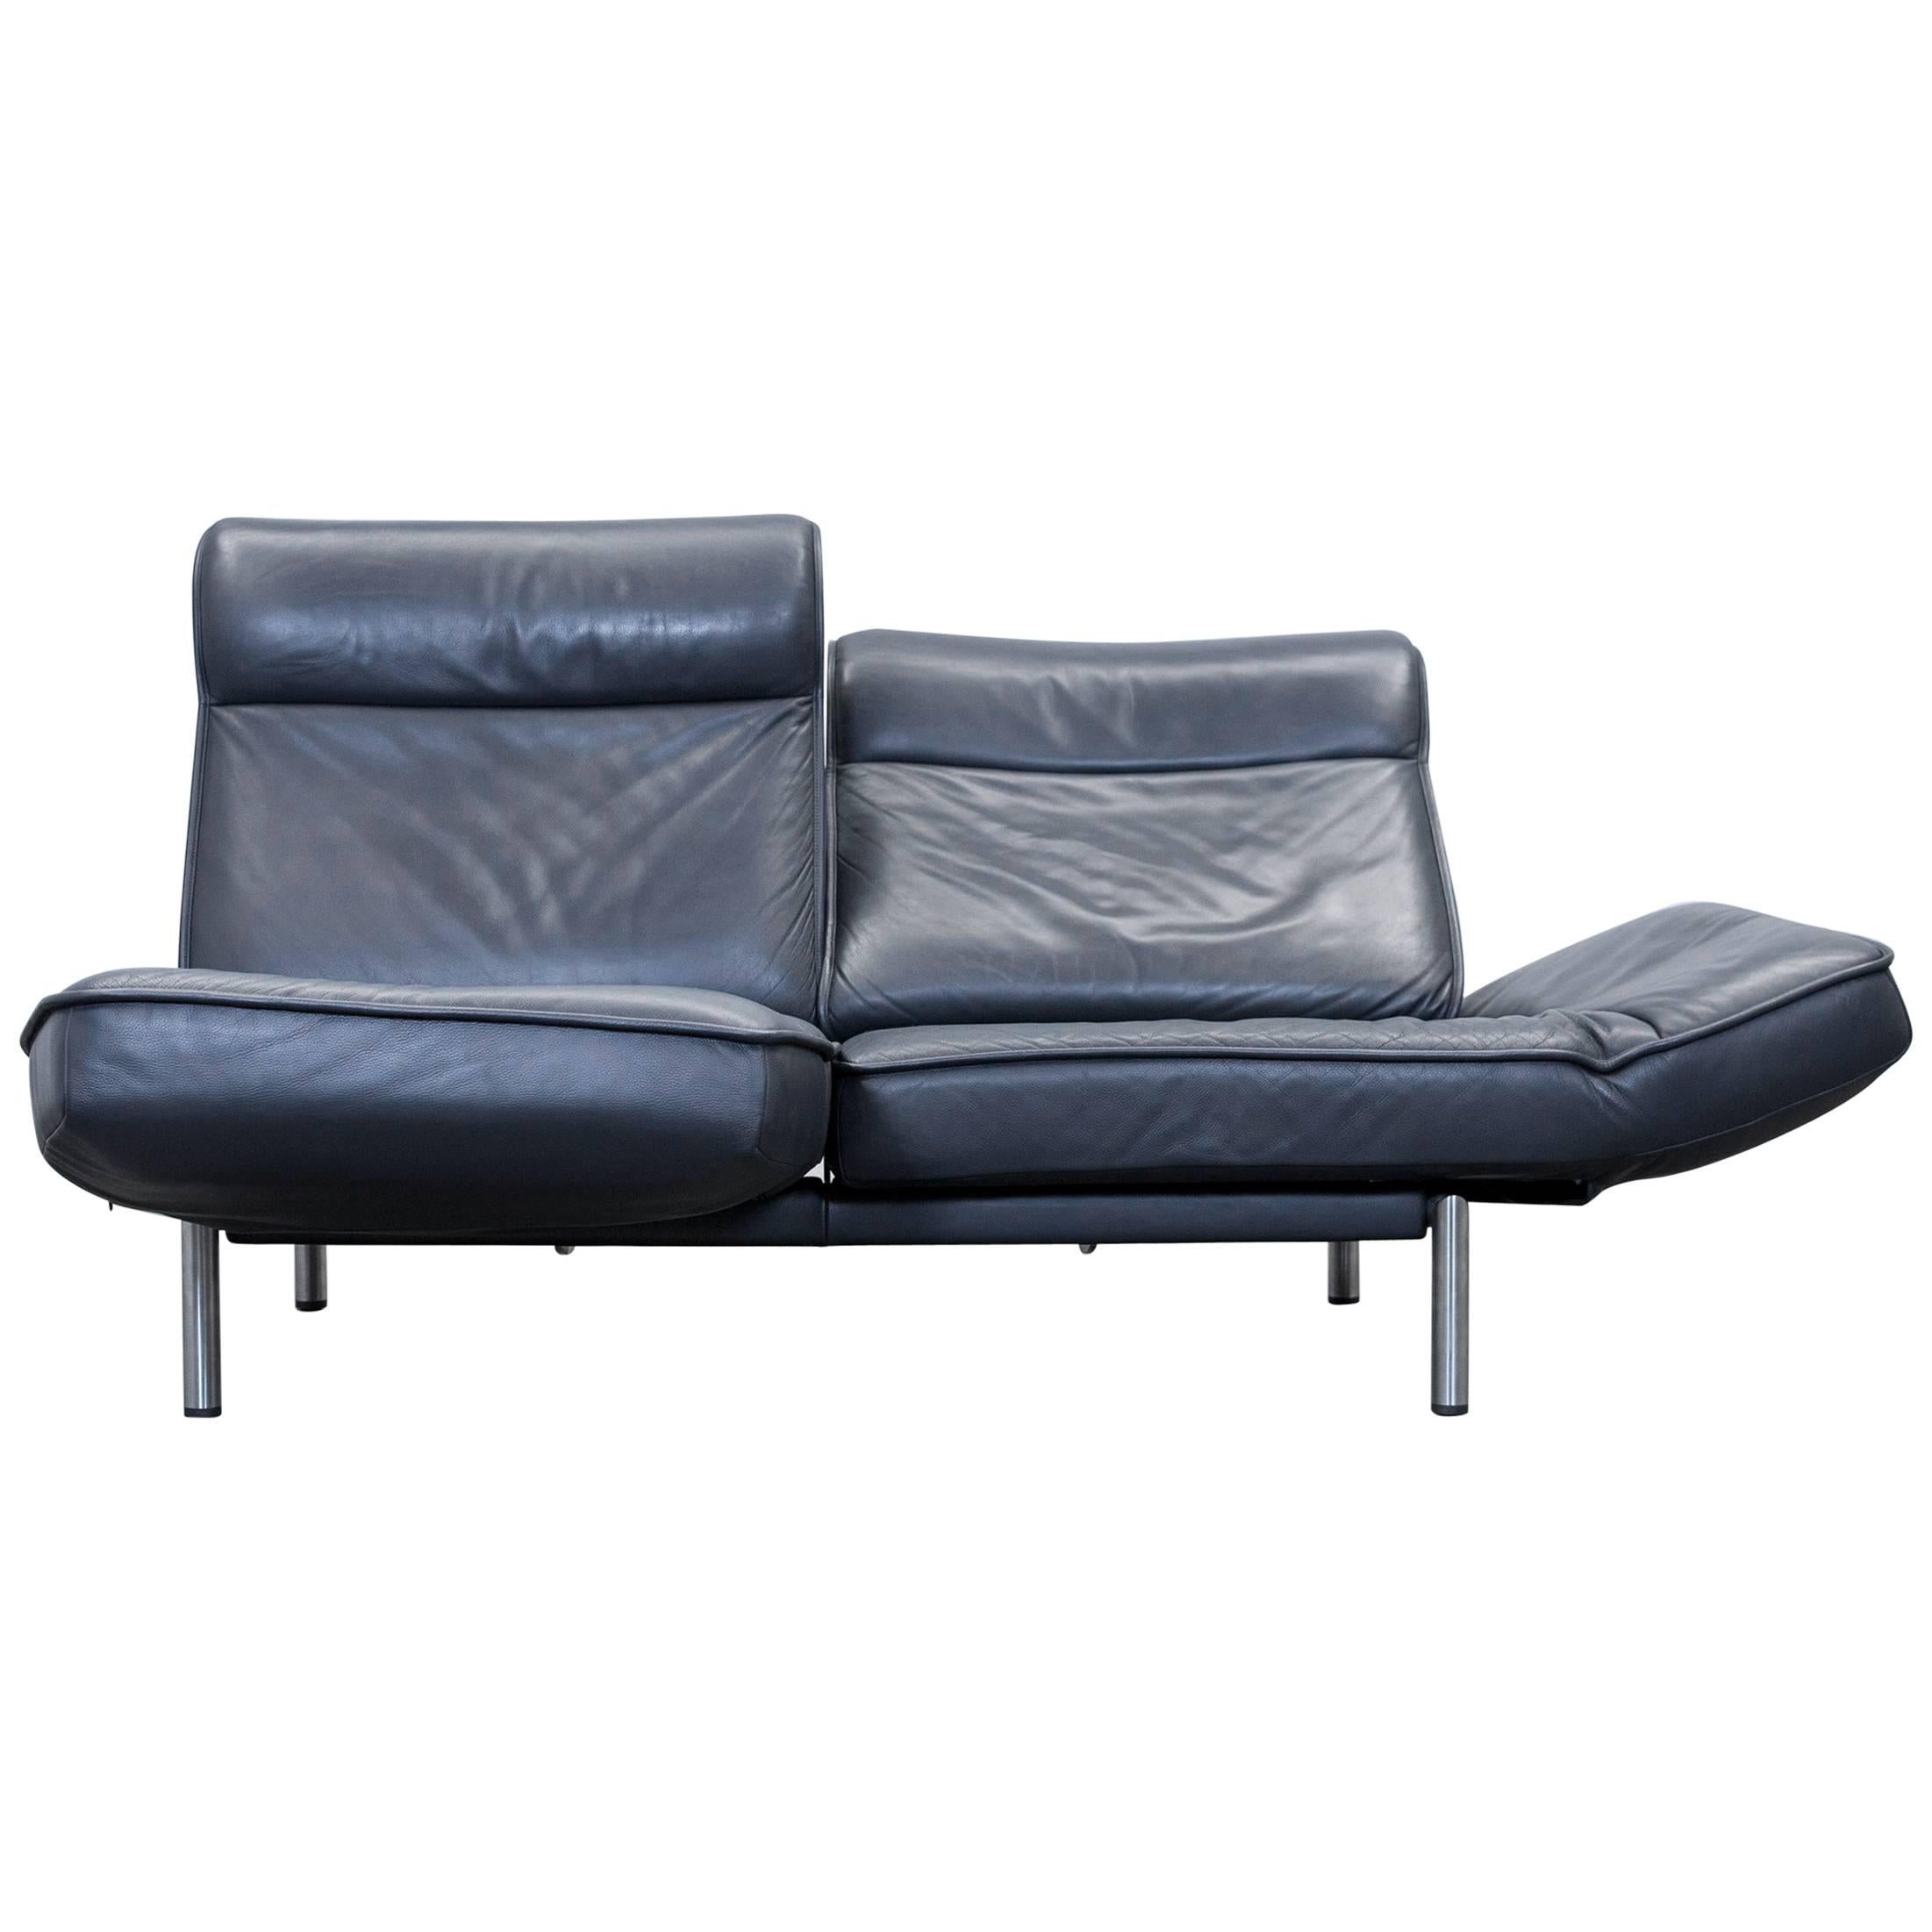 De Sede DS 450 Designer Leather Sofa Black Relax Function Two-Seat Modern